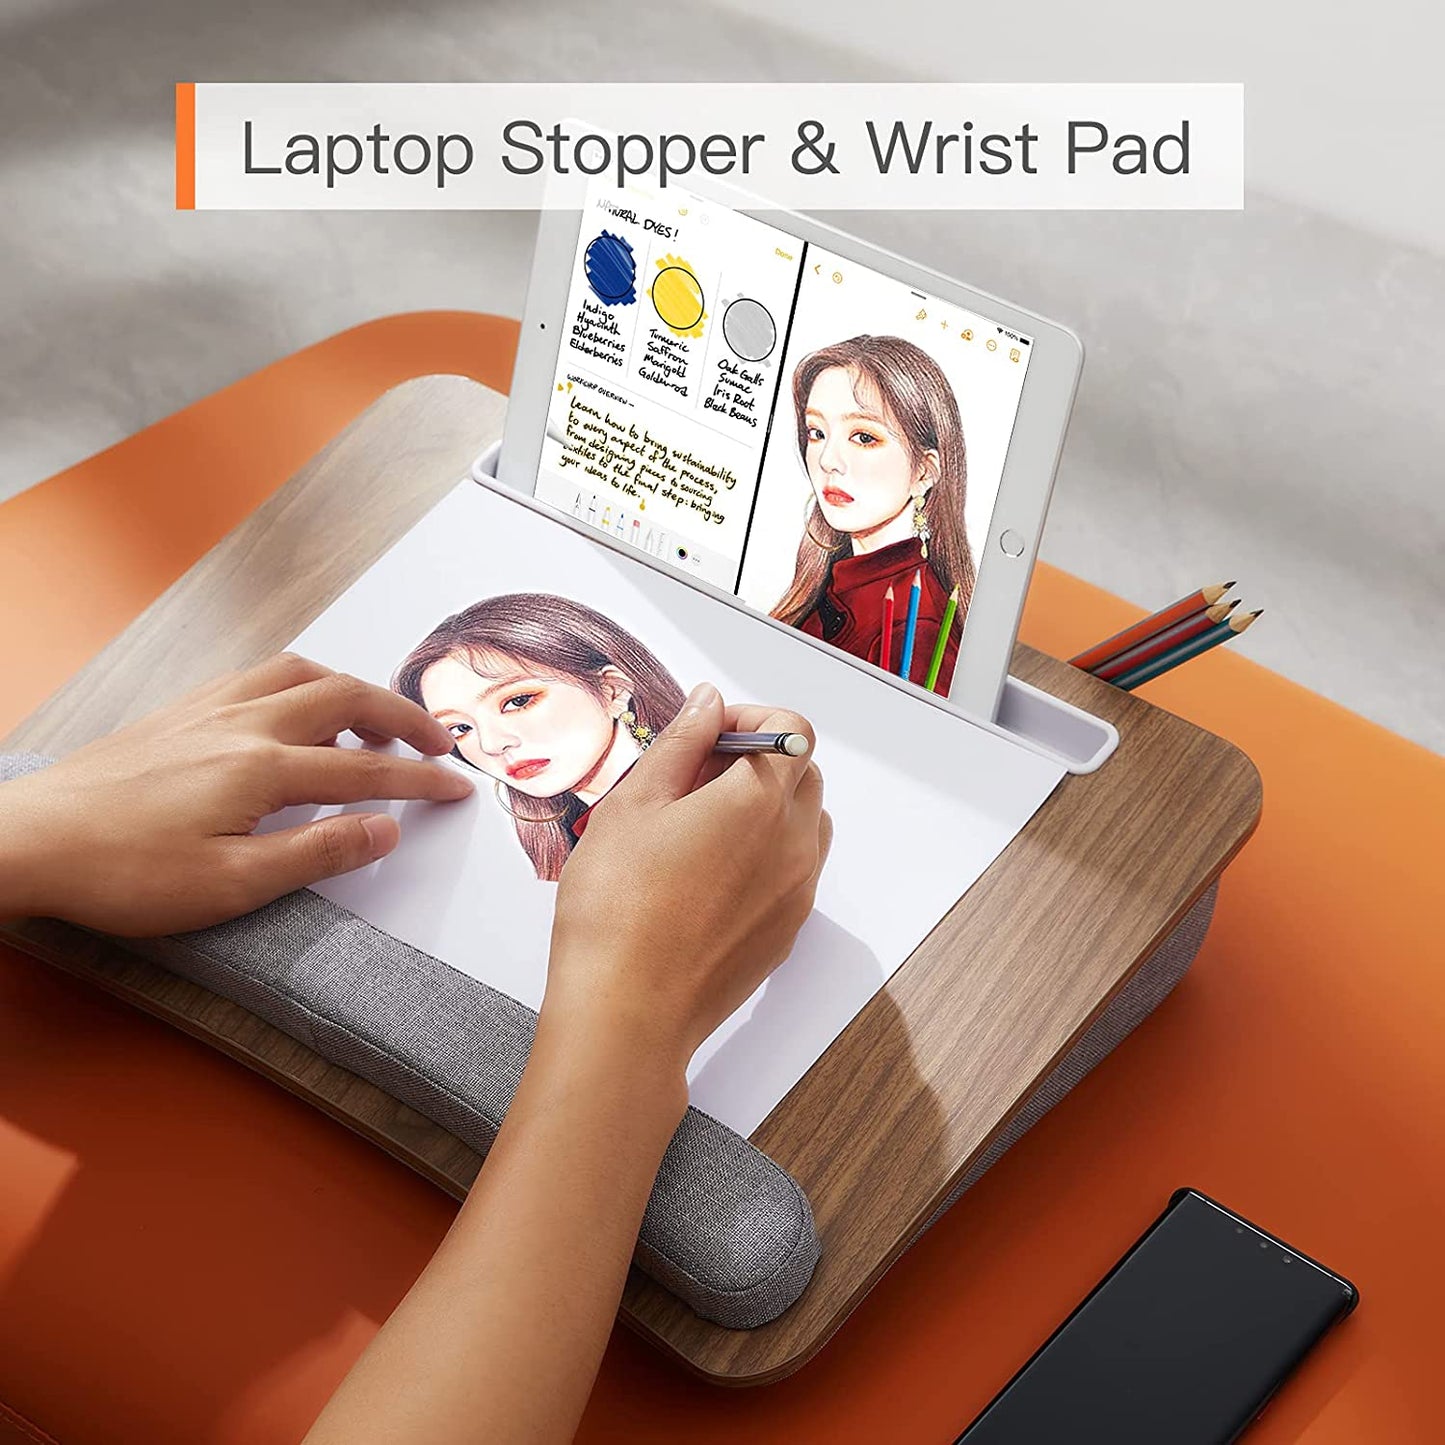 Lap Laptop Desk - Portable Lap Desk with Pillow Cushion, Fits up to 15.6 Inch Laptop, with Anti-Slip Strip & Storage Function for Home Office Students Use as Computer Laptop Stand, Book Tablet